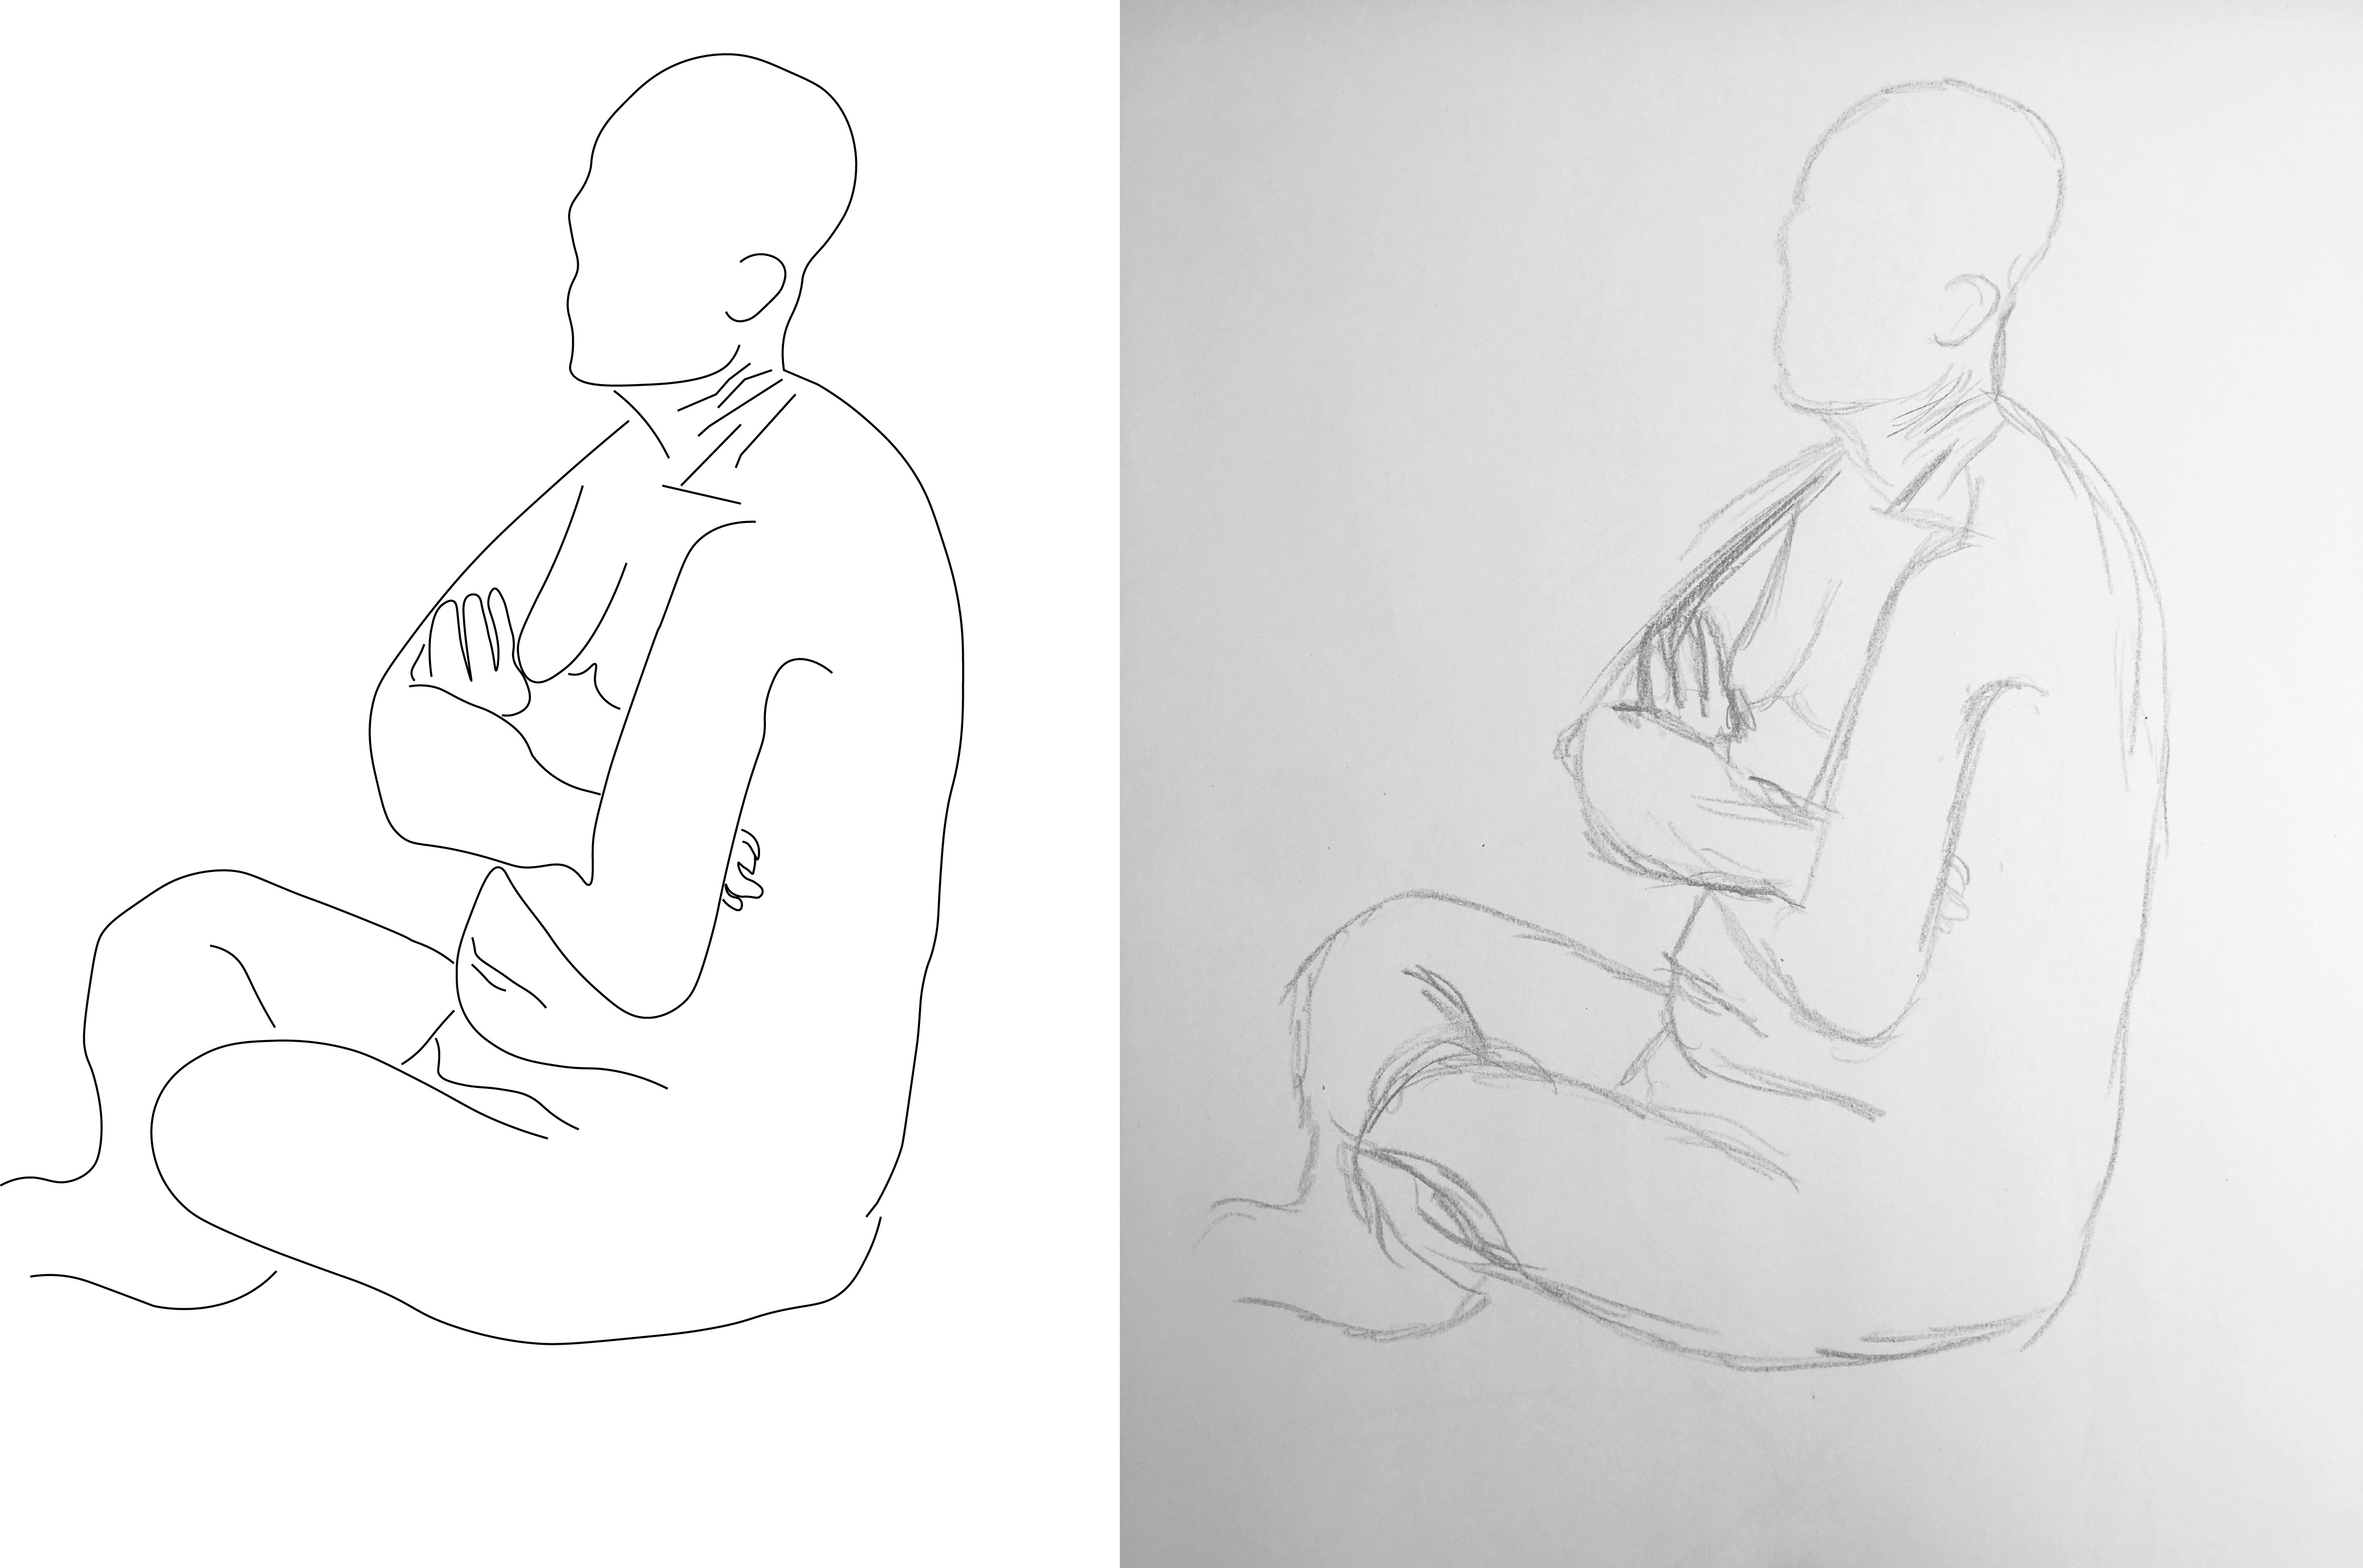 Blind Contour Drawings and Gesture Drawings on Illustrator